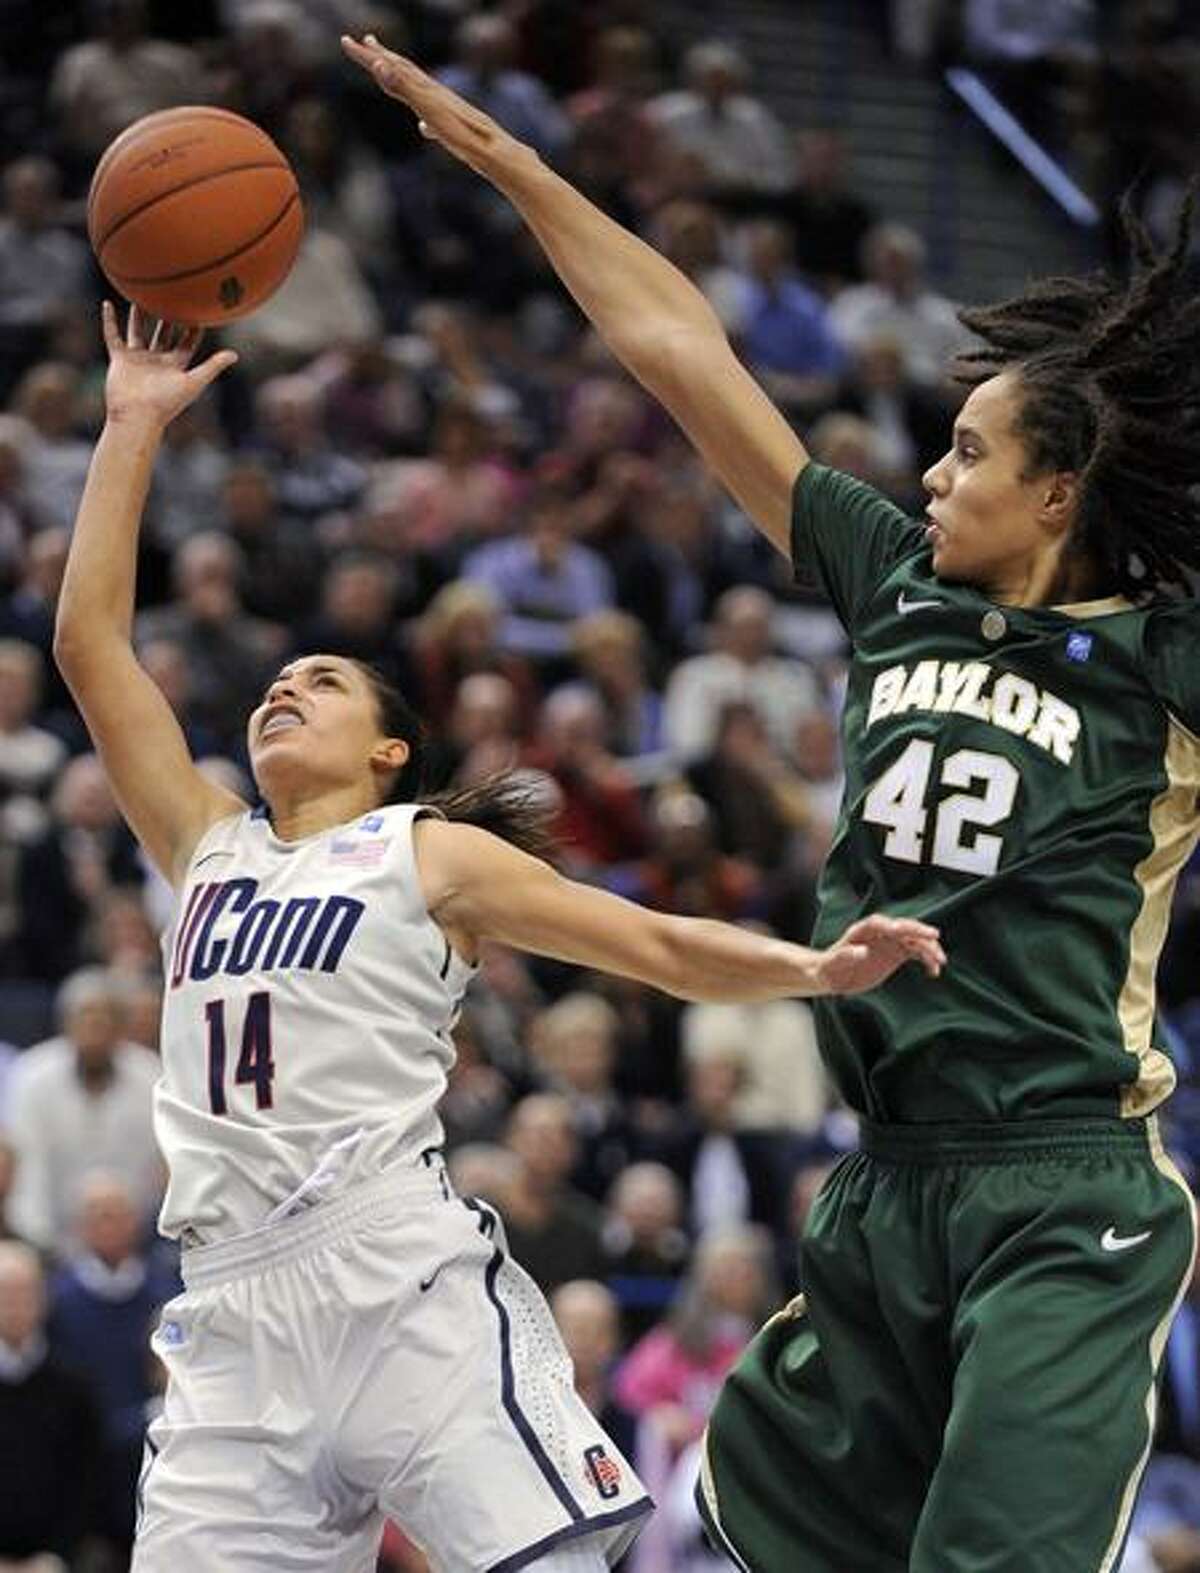 Baylor's Brittney Griner, right, defends on a shot by Connecticut's Bria Hartley during the second half of Connecticut's 65-64 victory in an NCAA college basketball game in Hartford, Conn., on Tuesday, Nov. 16, 2010. Griner scored 19 points, had seven rebounds and nine blocked shots. (AP Photo/Fred Beckham)